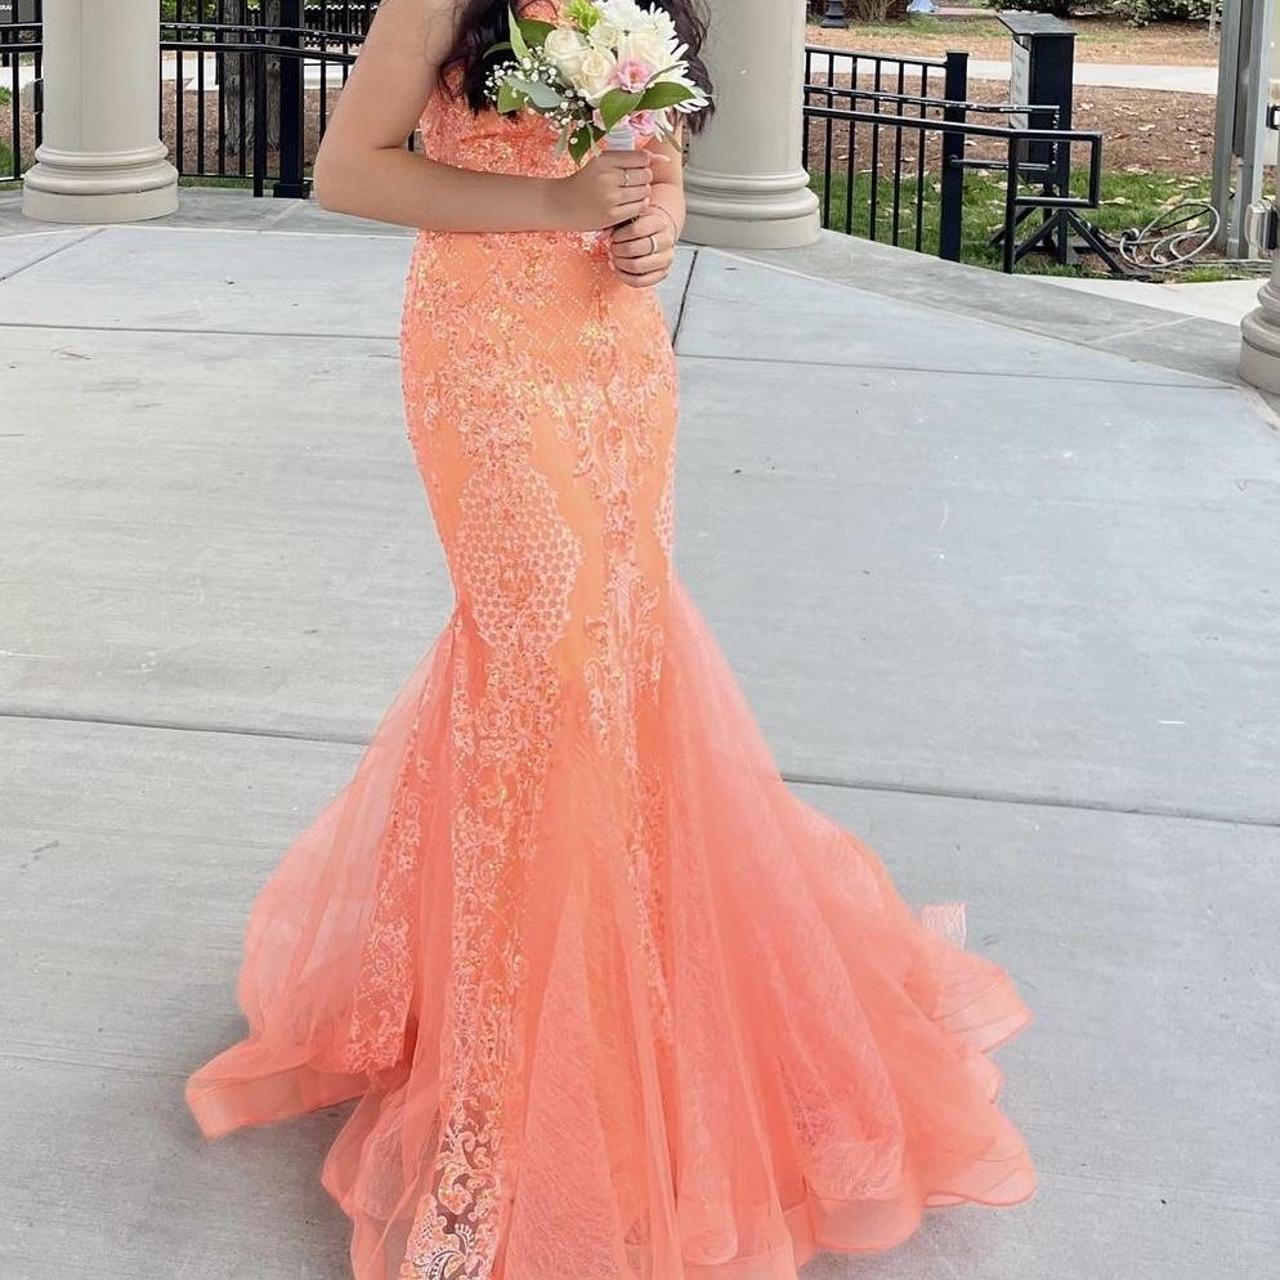 Wear Confidence. The Prom Dress is Just for a Night. | Featured News Story  | Verizon